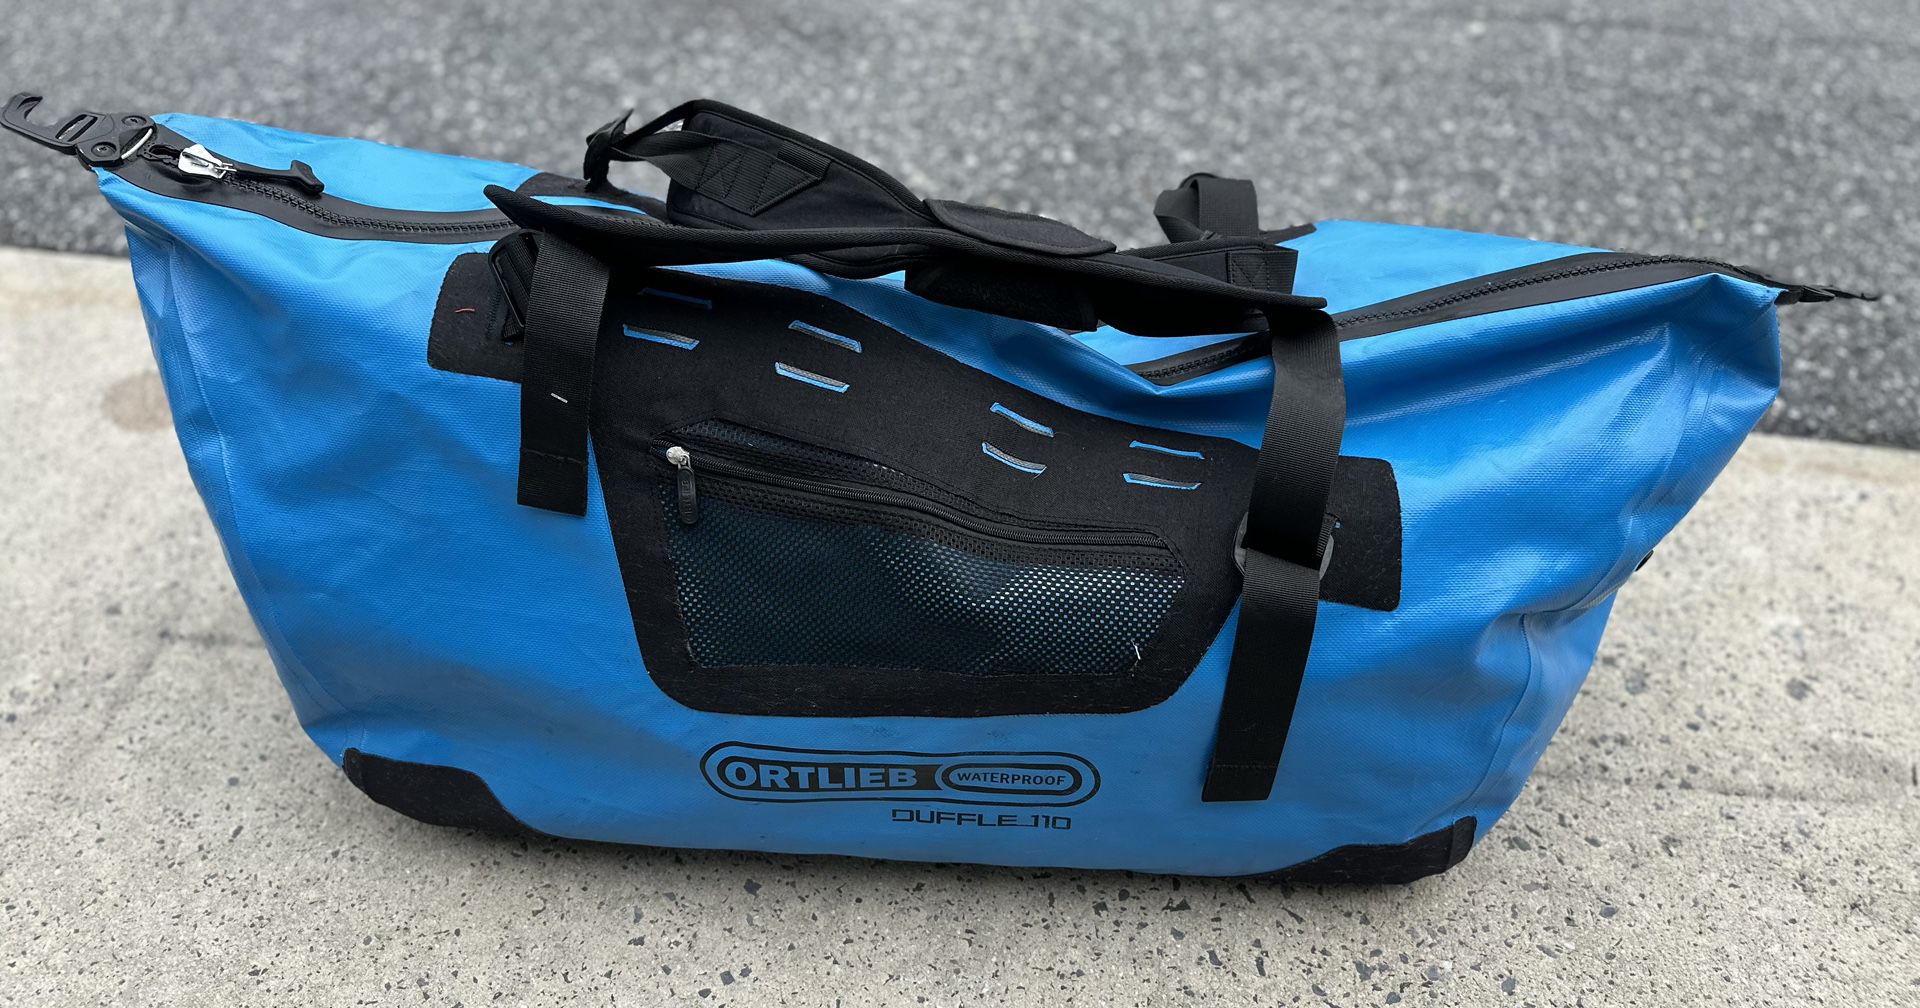 The Ortlieb Duffel Bag Large Size 110L camping hiking outdoors